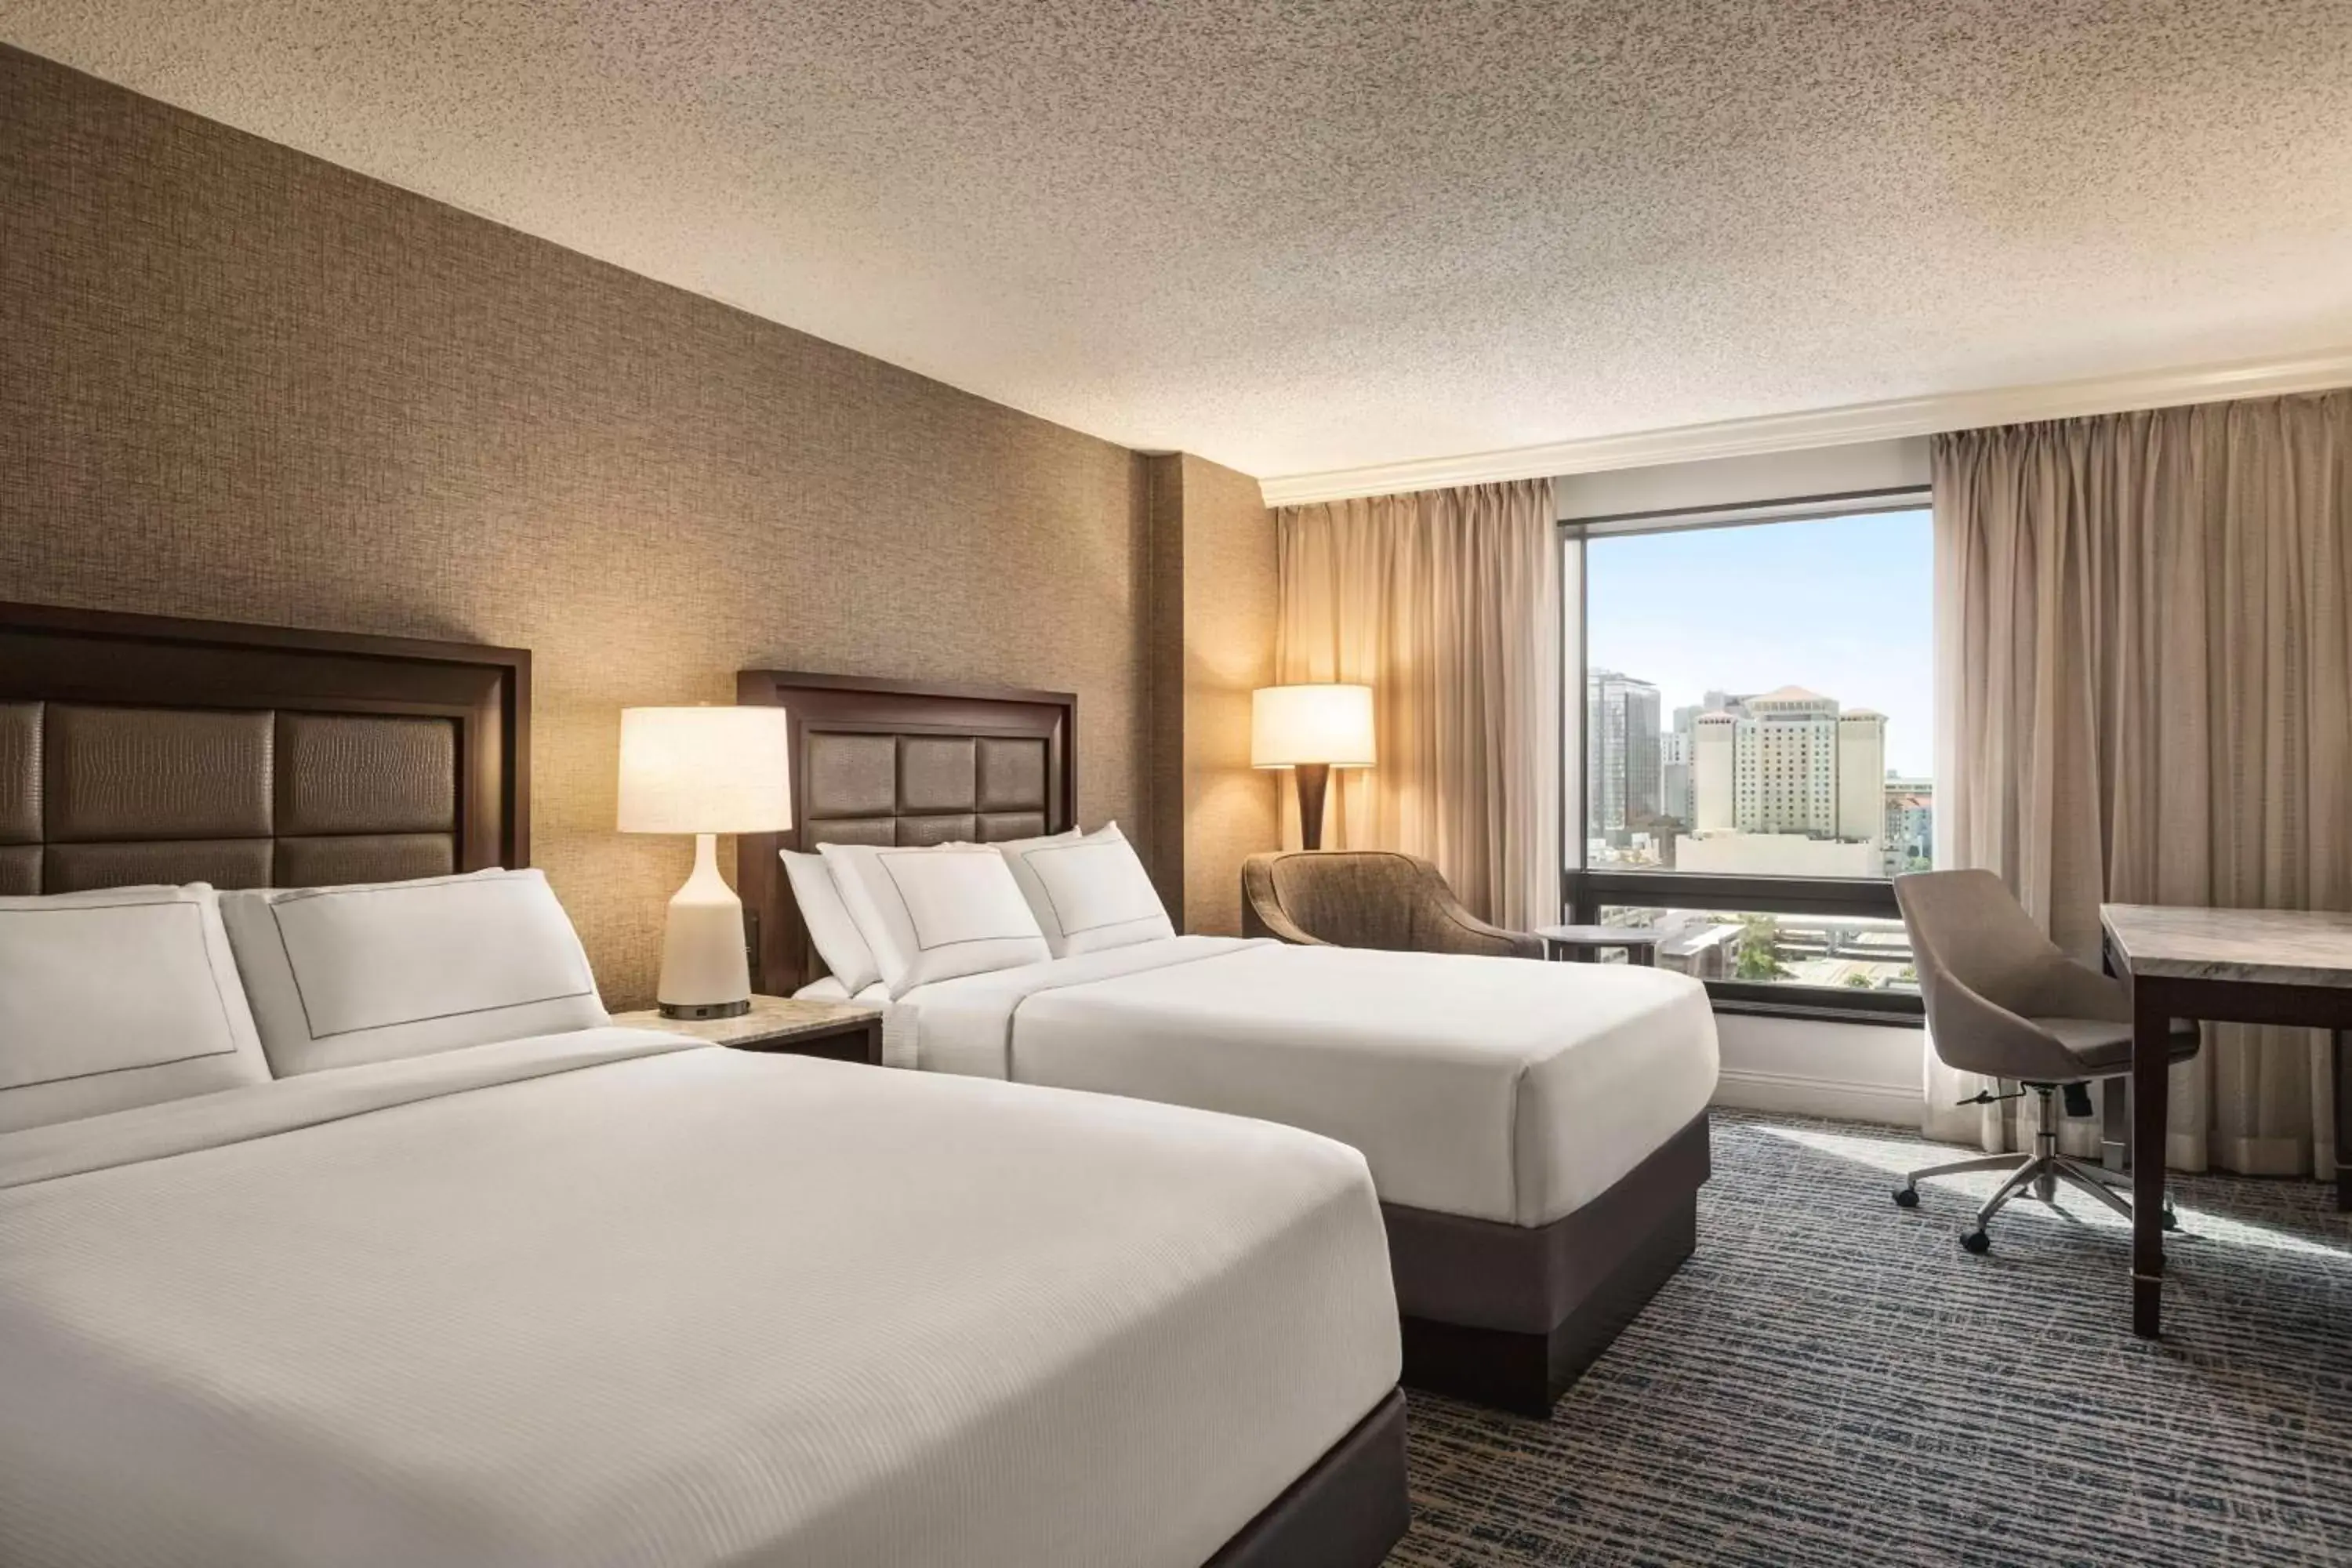 Standard Room with Two Double Beds with Pool View in Hilton Tampa Downtown